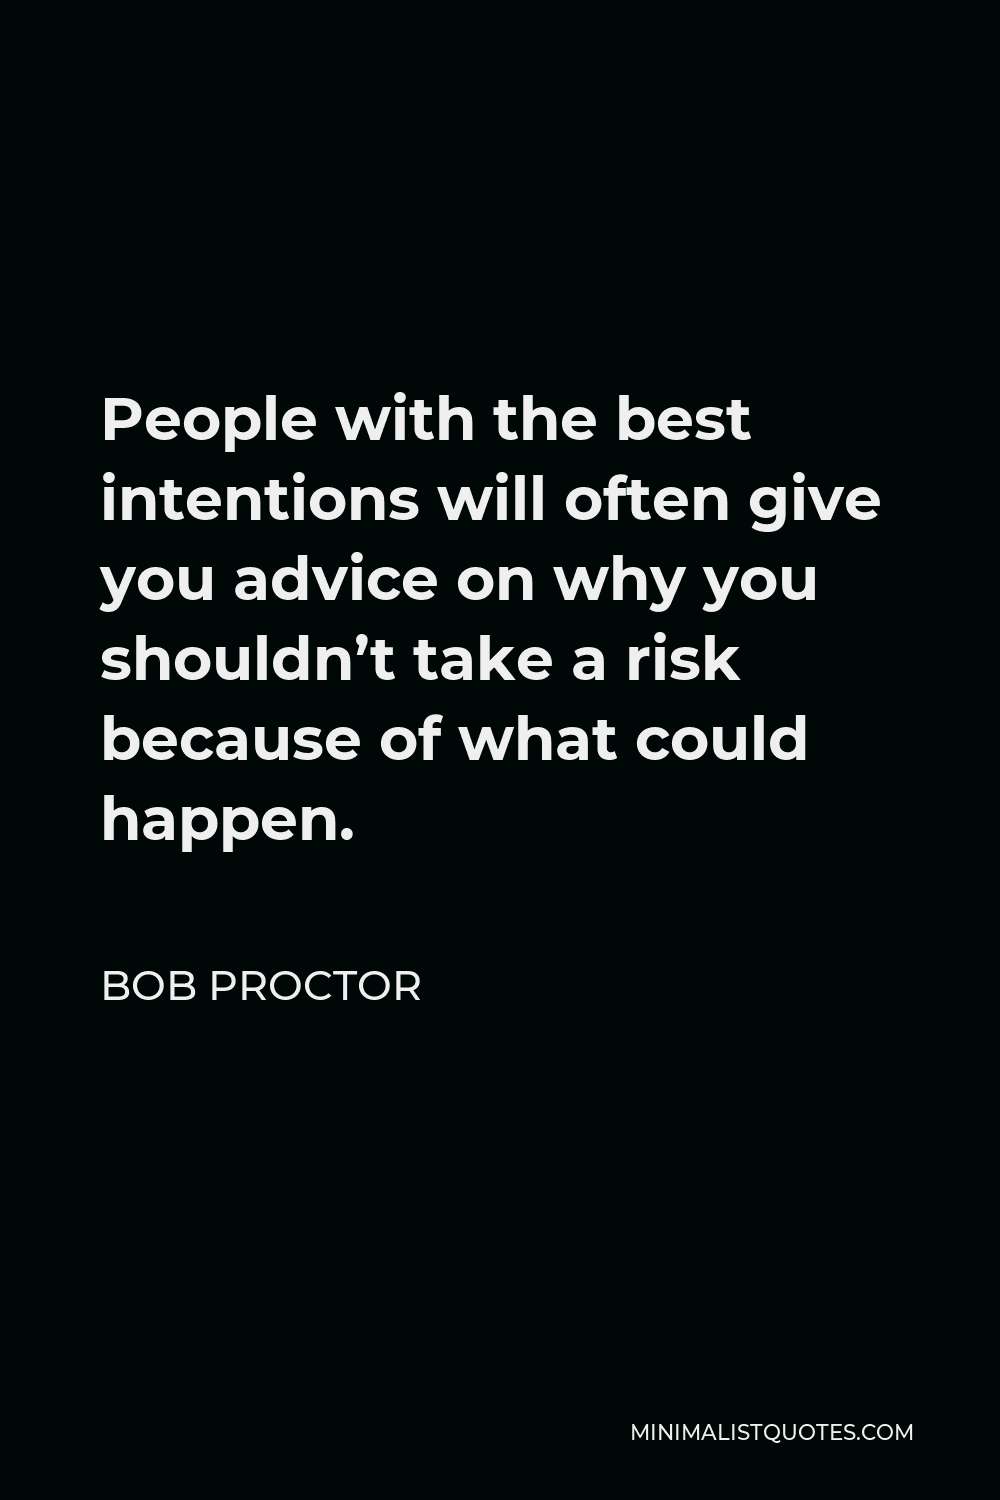 Bob Proctor Quote - People with the best intentions will often give you advice on why you shouldn’t take a risk because of what could happen.